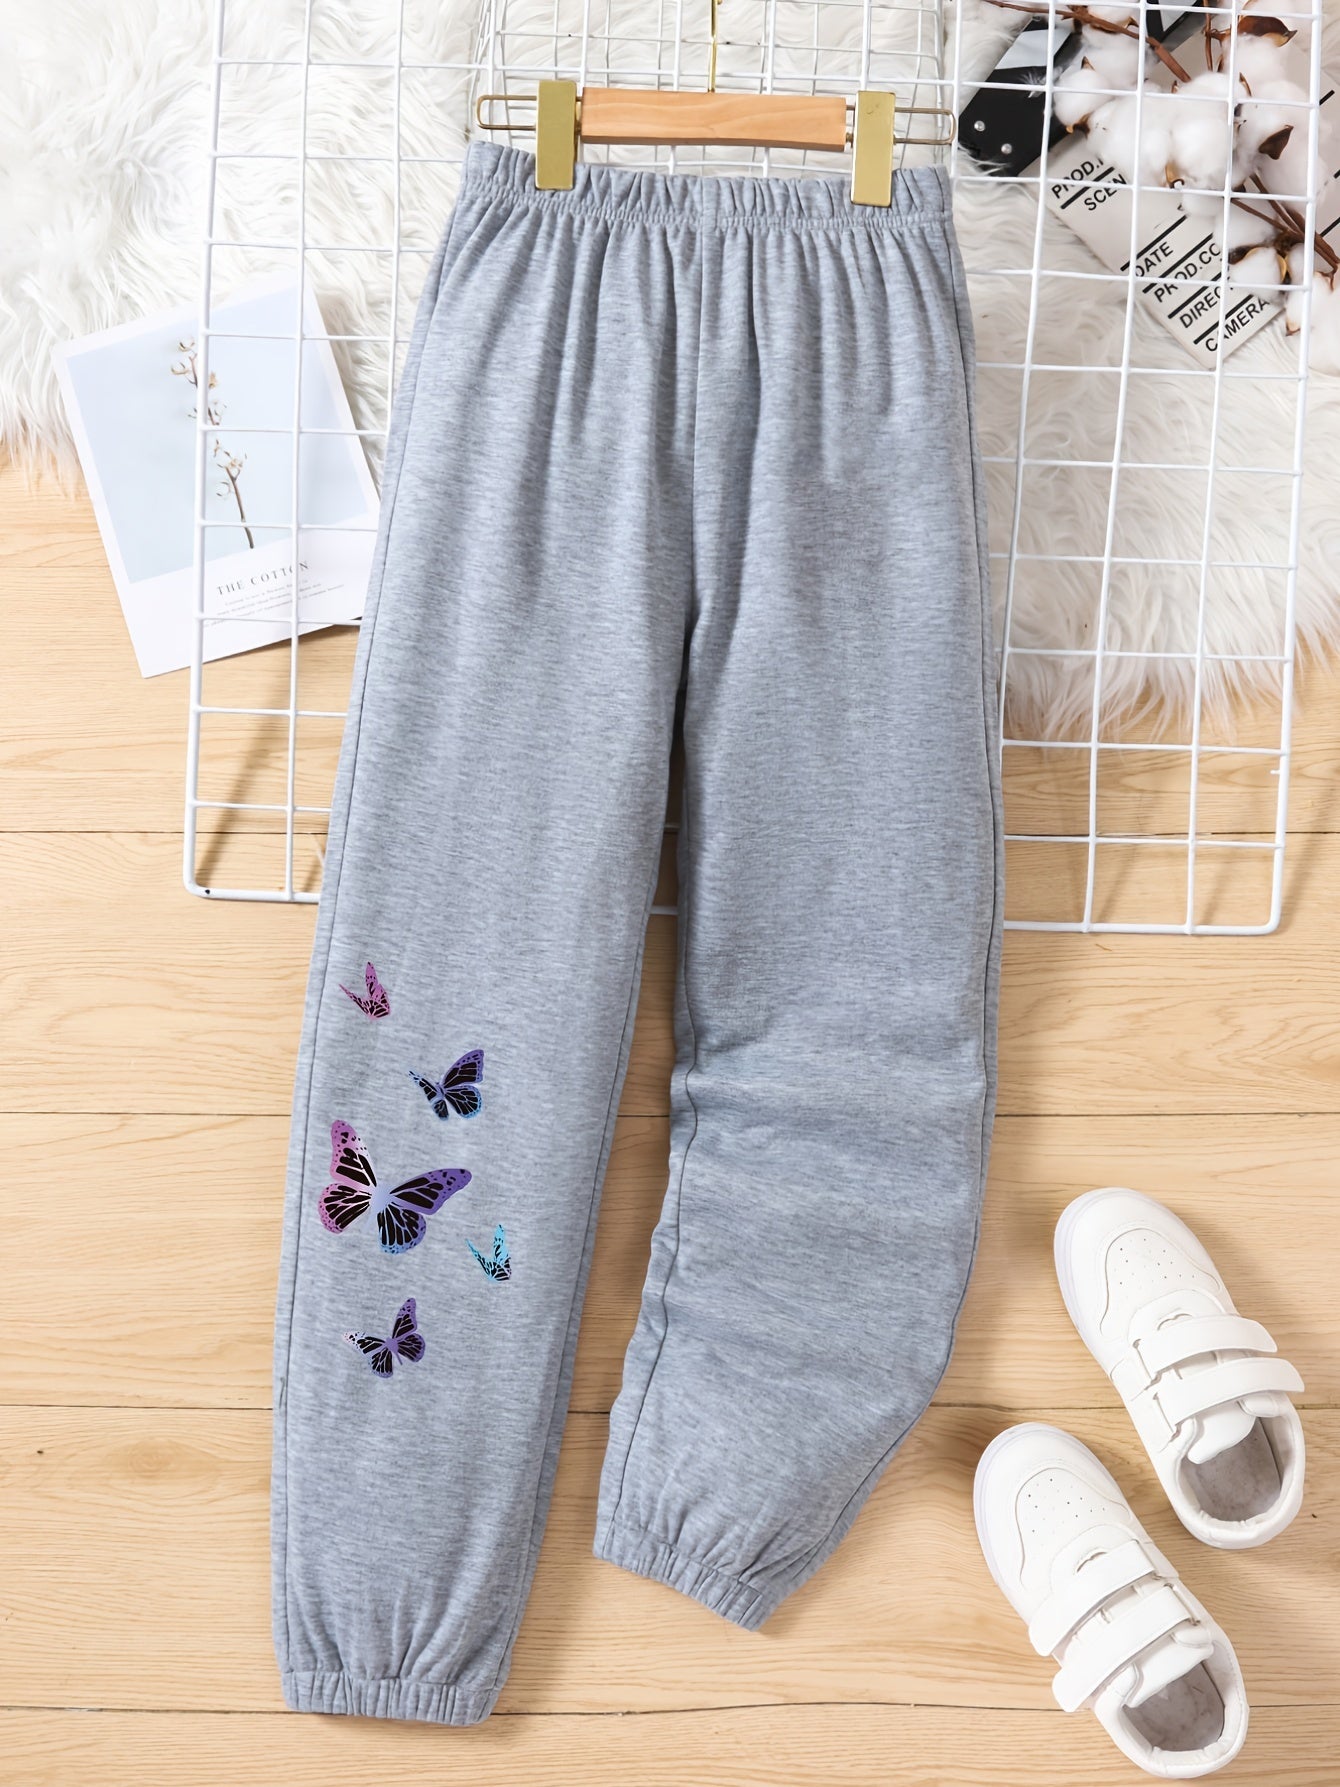 Butterfly Print Girls Sweatpants - A Stylish and Comfortable Option for Active Kids